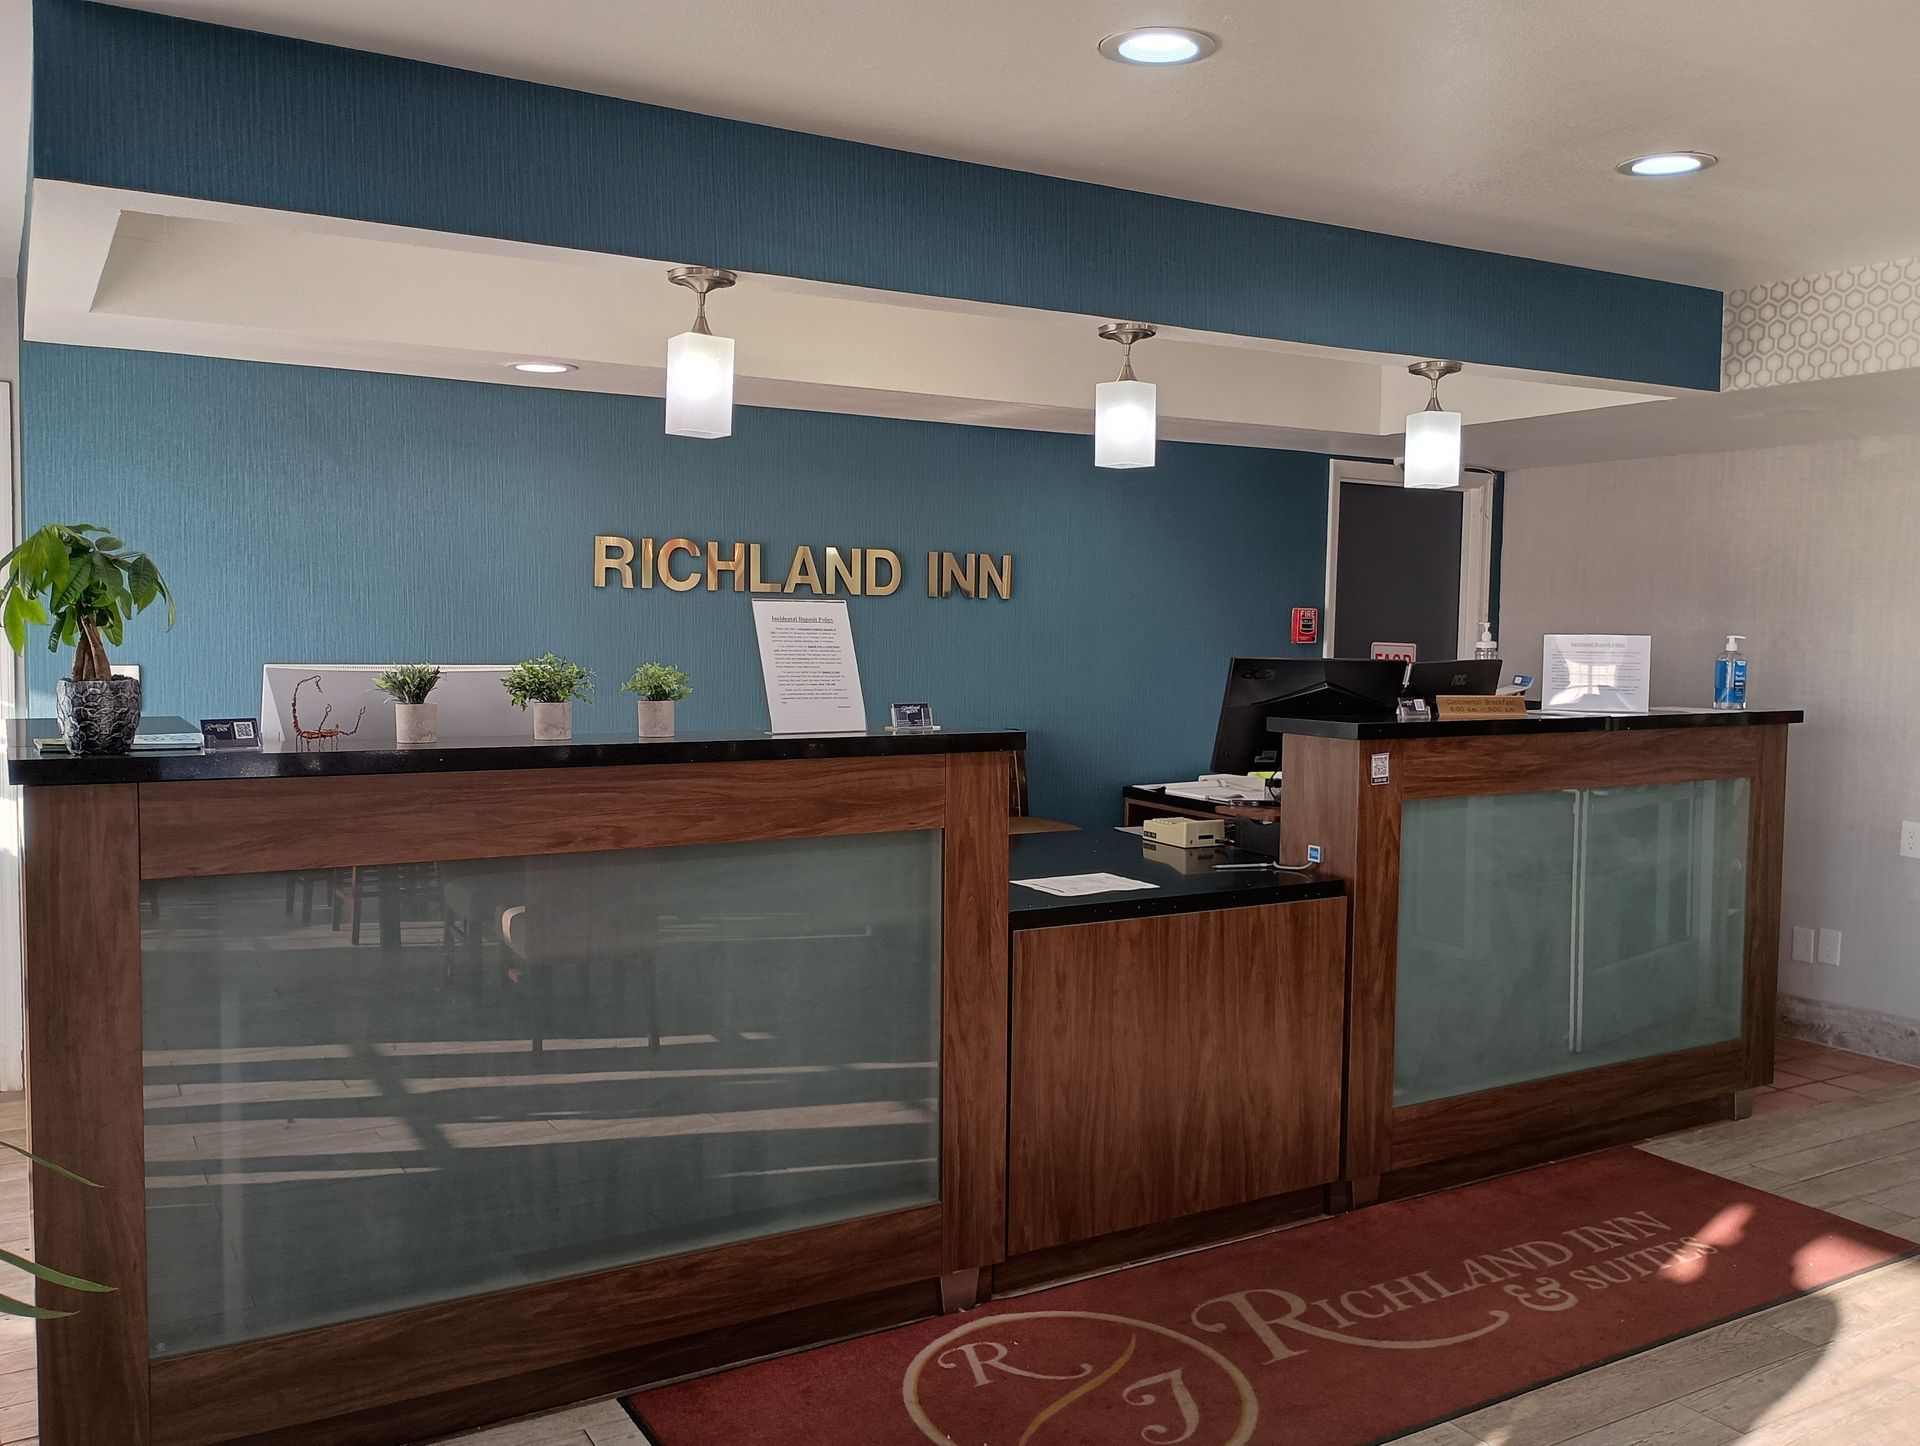 Richland Inn of Columbia hotel lobby with a reception desk. 